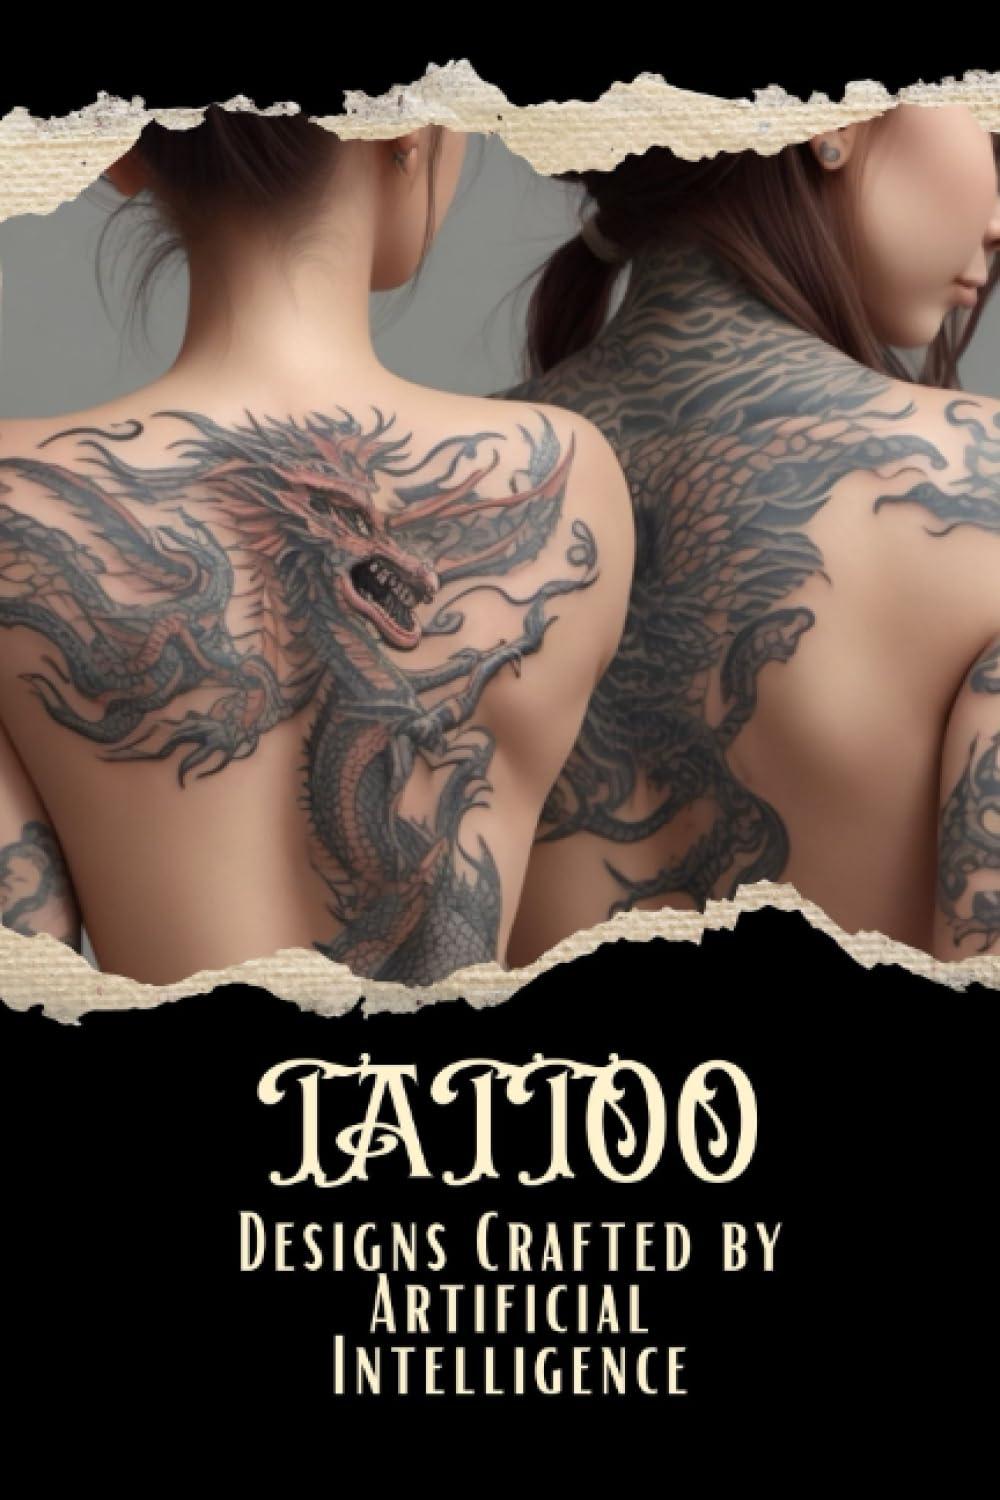 revolutionary tattoo designs crafted by artificial intelligence 1st edition ethan parker b0cgl5yqy4,